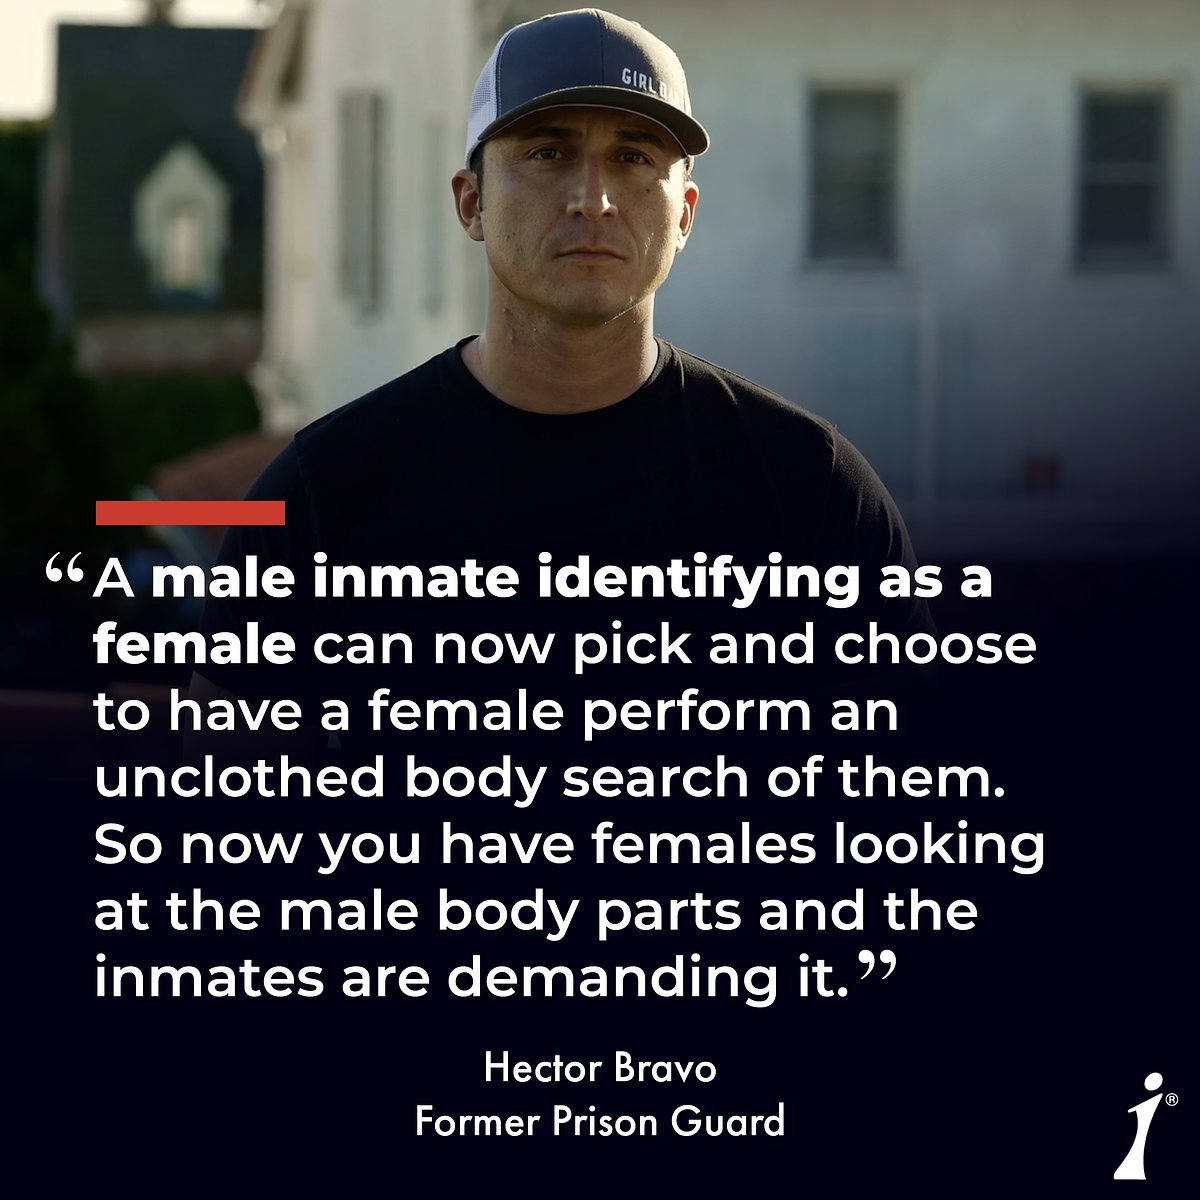 Did you know female correctional officers are now being forced to strip search MALE inmates who identify as women⁉️ Former prison guard Hector Bravo shares the shocking fallout of ‘trans’ policies that few—if any—are willing to address. Watch the story: iwf.org/cruelandunusua…